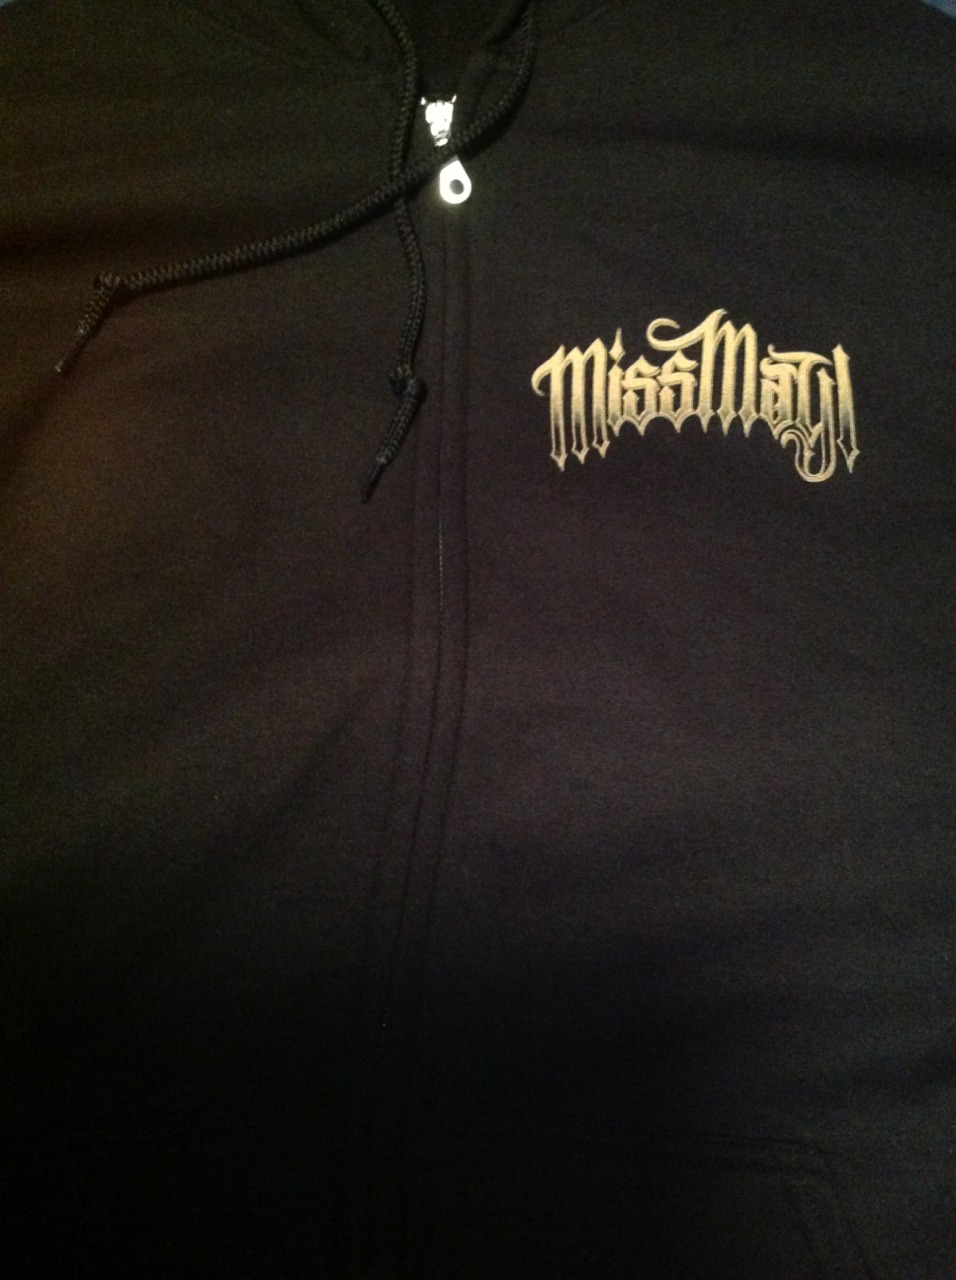 GOT SOME NEW MERCH TODAY MISS MAY I HOODIE